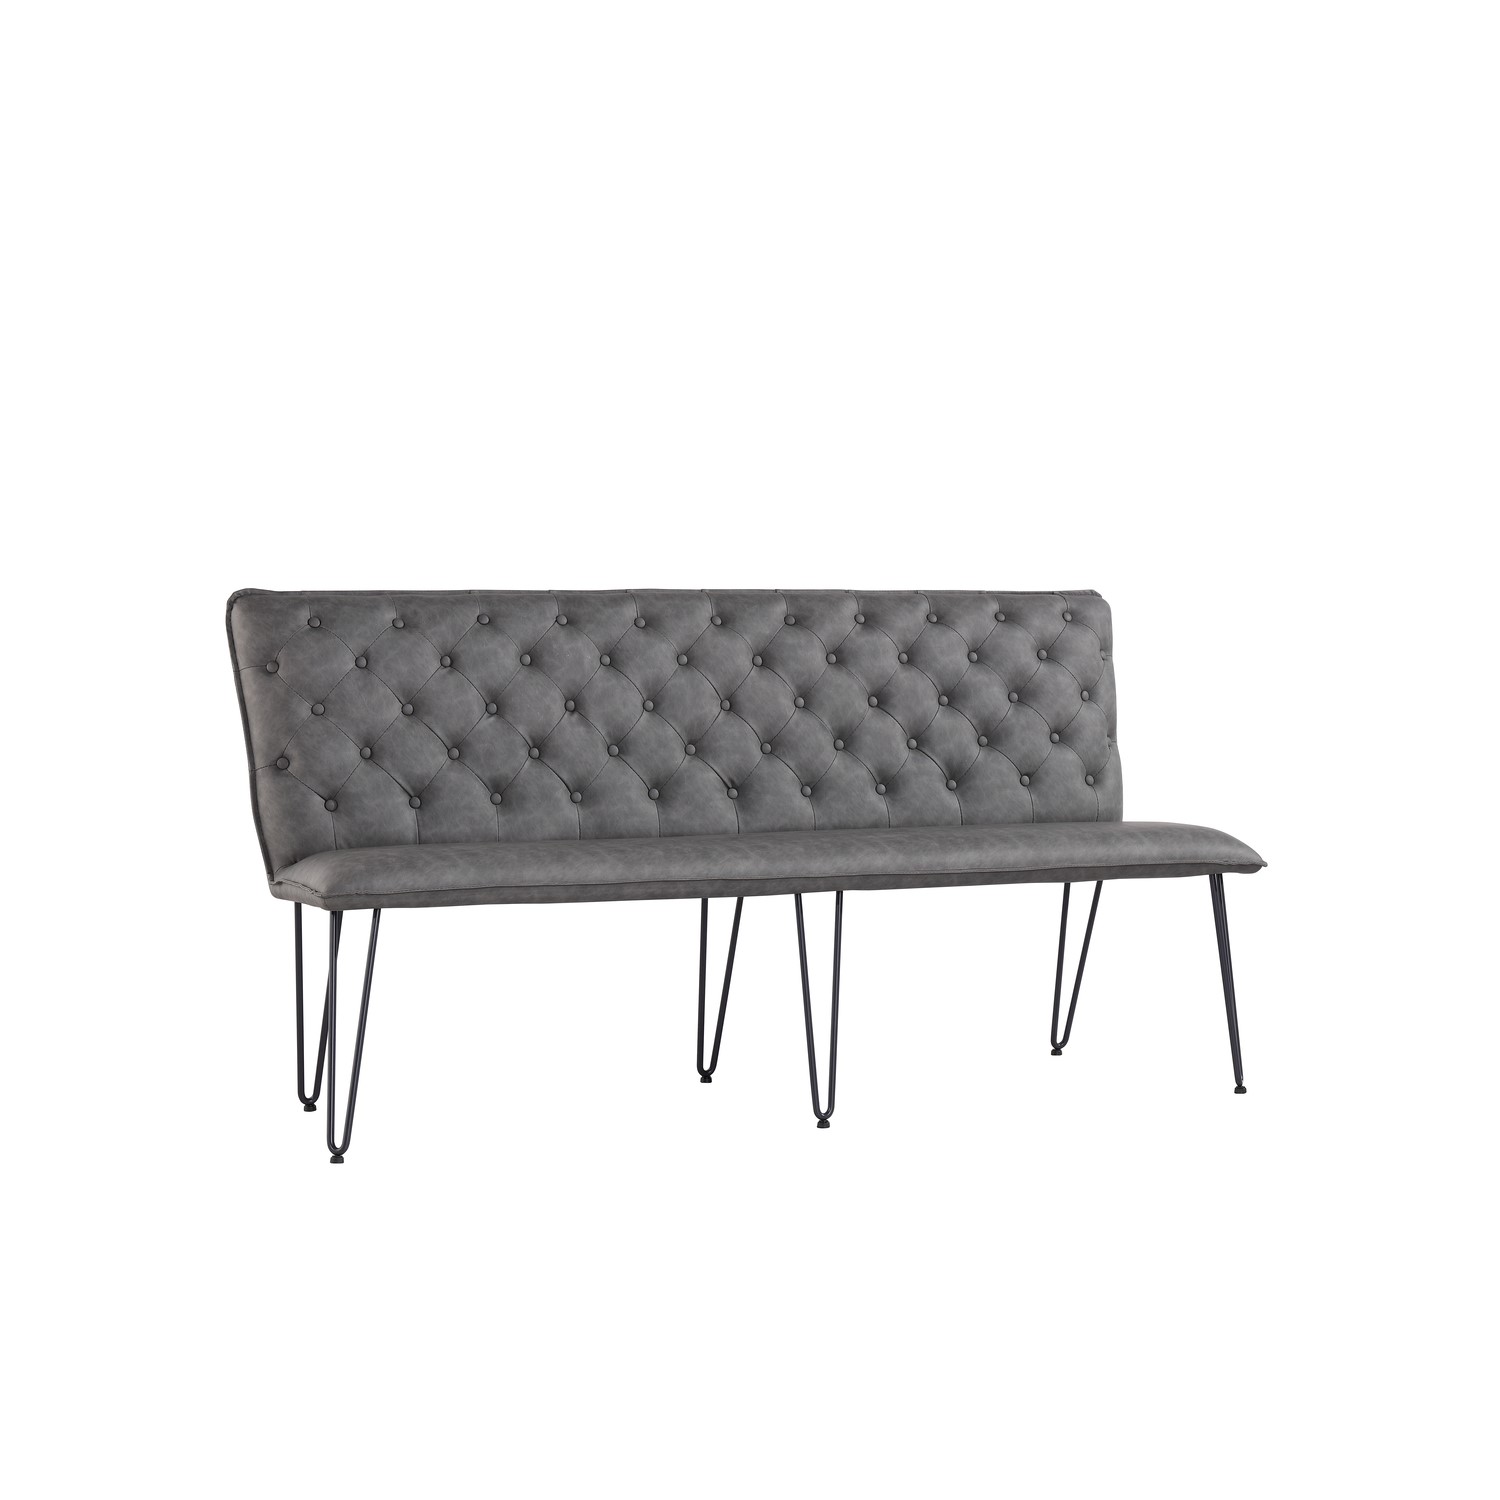 Large Grey Dining Bench With Studded Back Furniture123